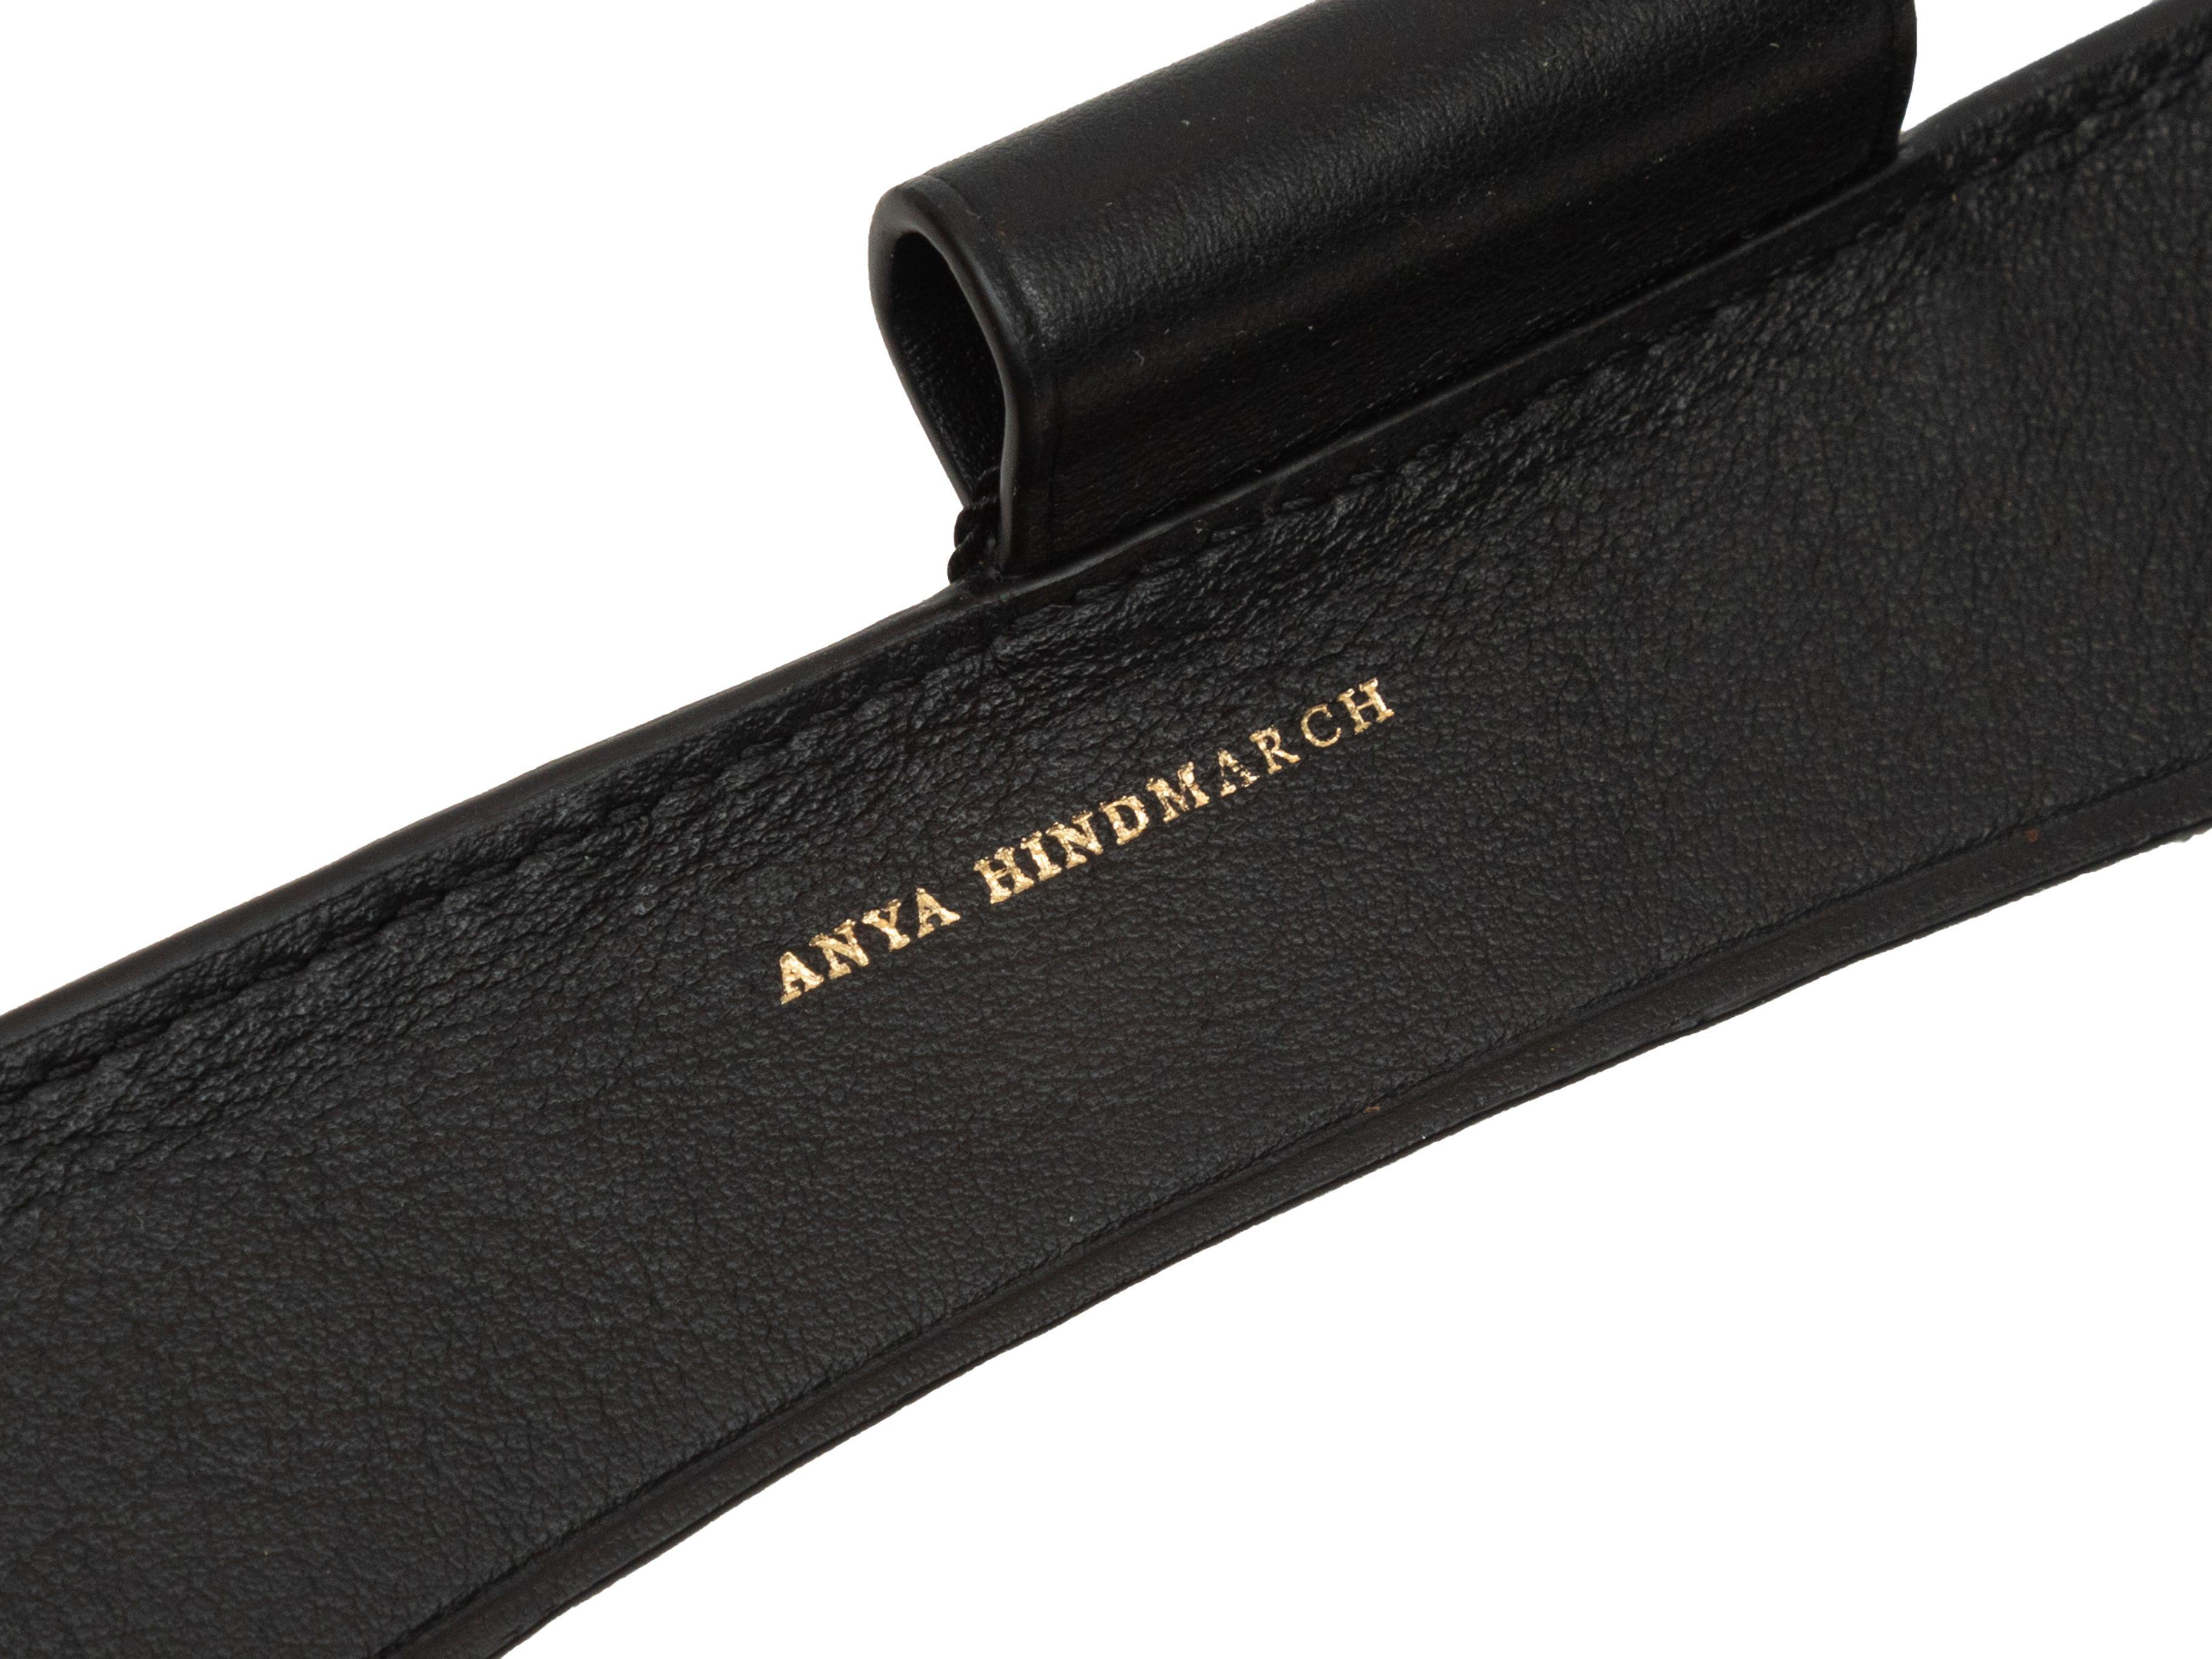 Product Details: Black leather allover sticker print journal with pen by Anya Hindmarch. 9